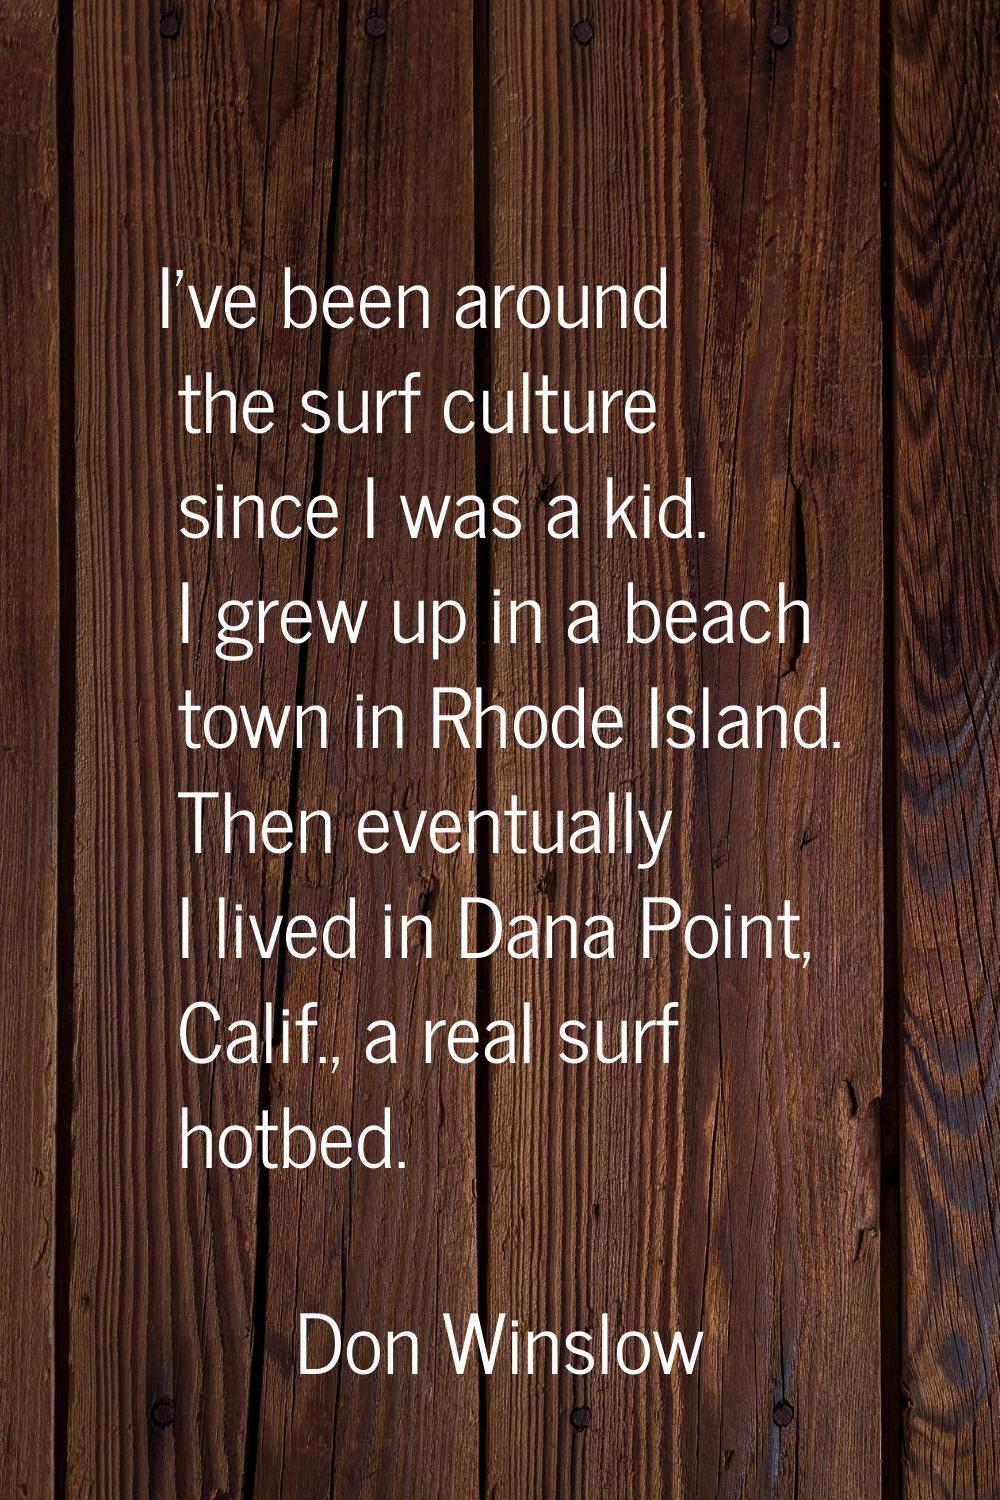 I've been around the surf culture since I was a kid. I grew up in a beach town in Rhode Island. The